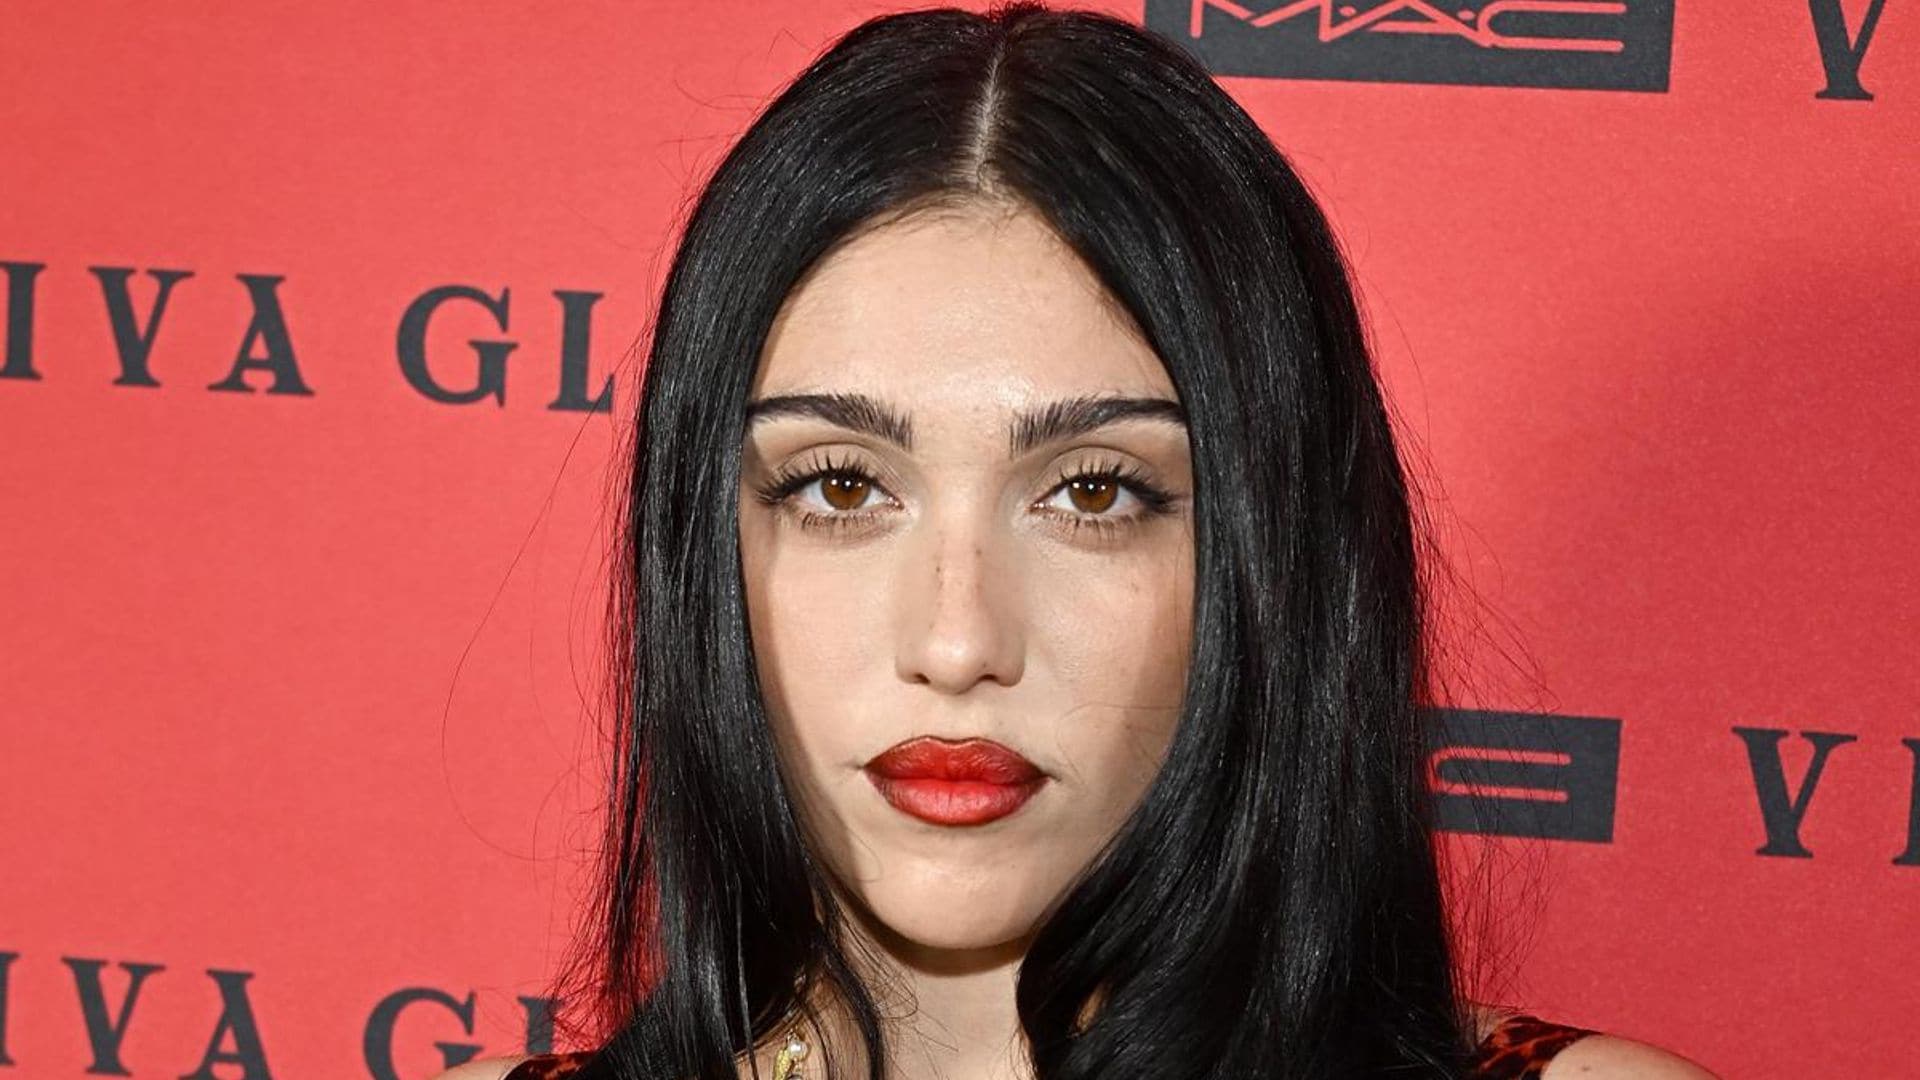 Lourdes Leon channels mom Madonna’s iconic style paring leopard print with crosses